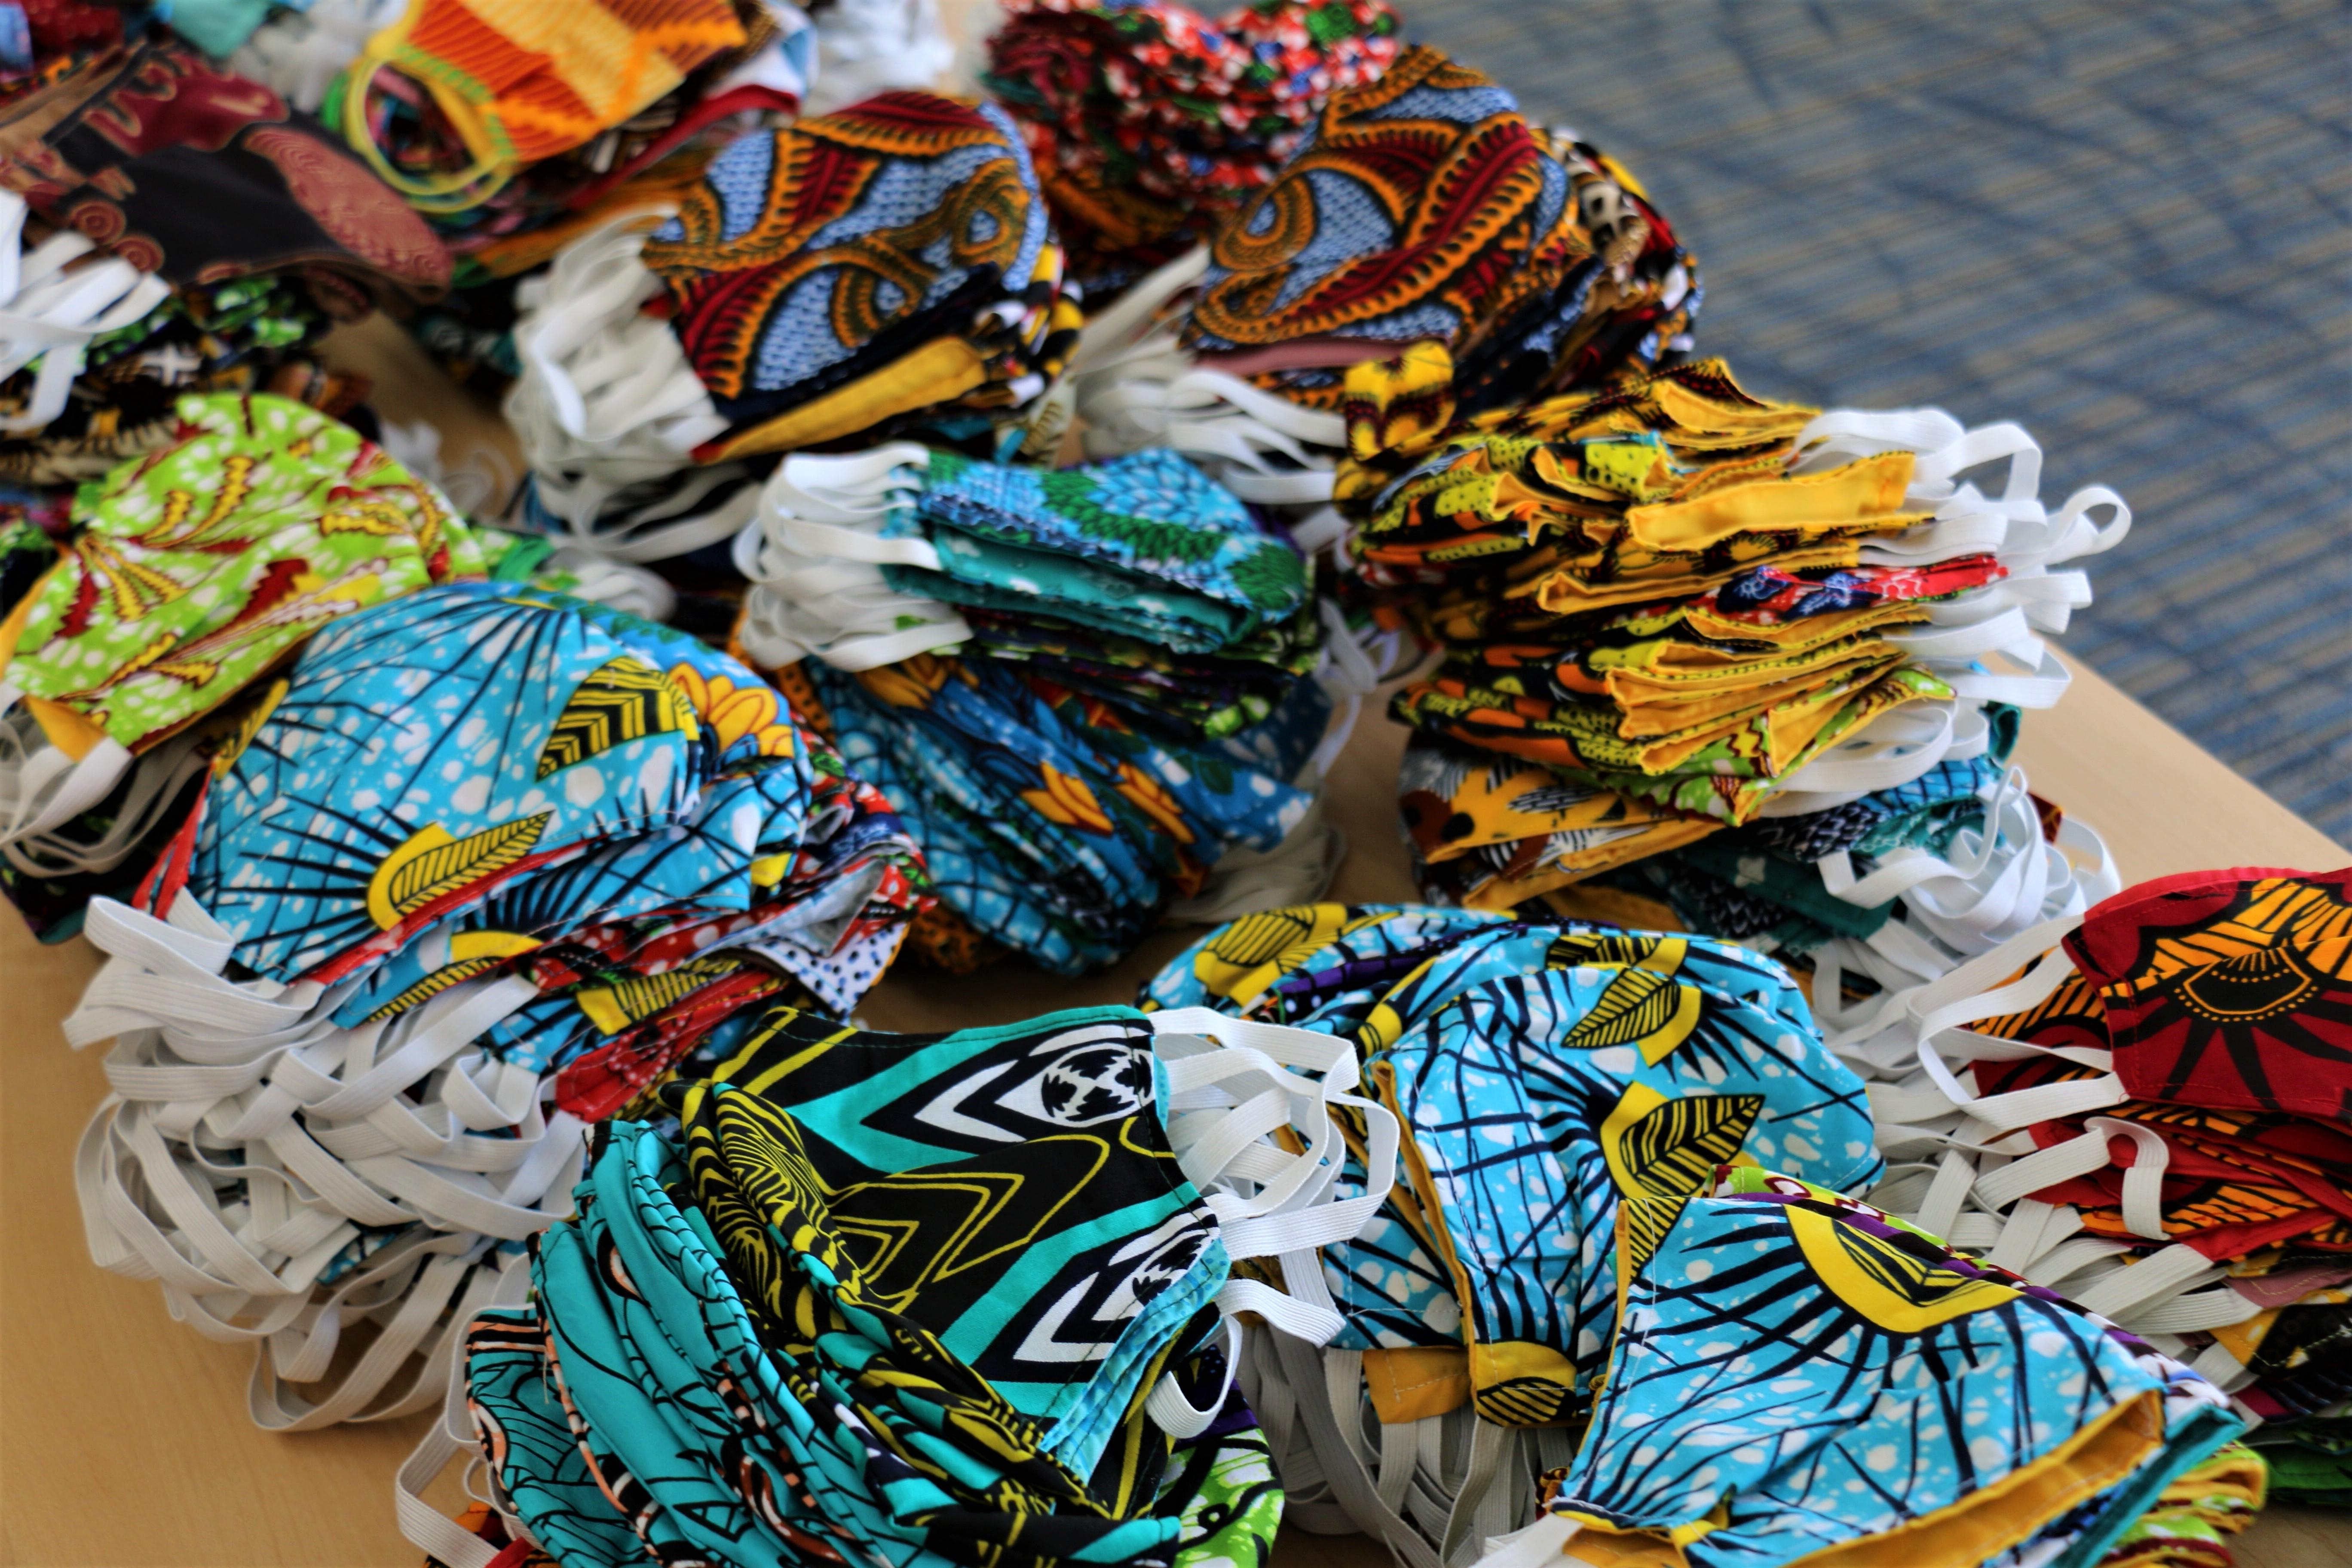 Mount Mercy大学 partners with local refugee group to sew masks for campus community